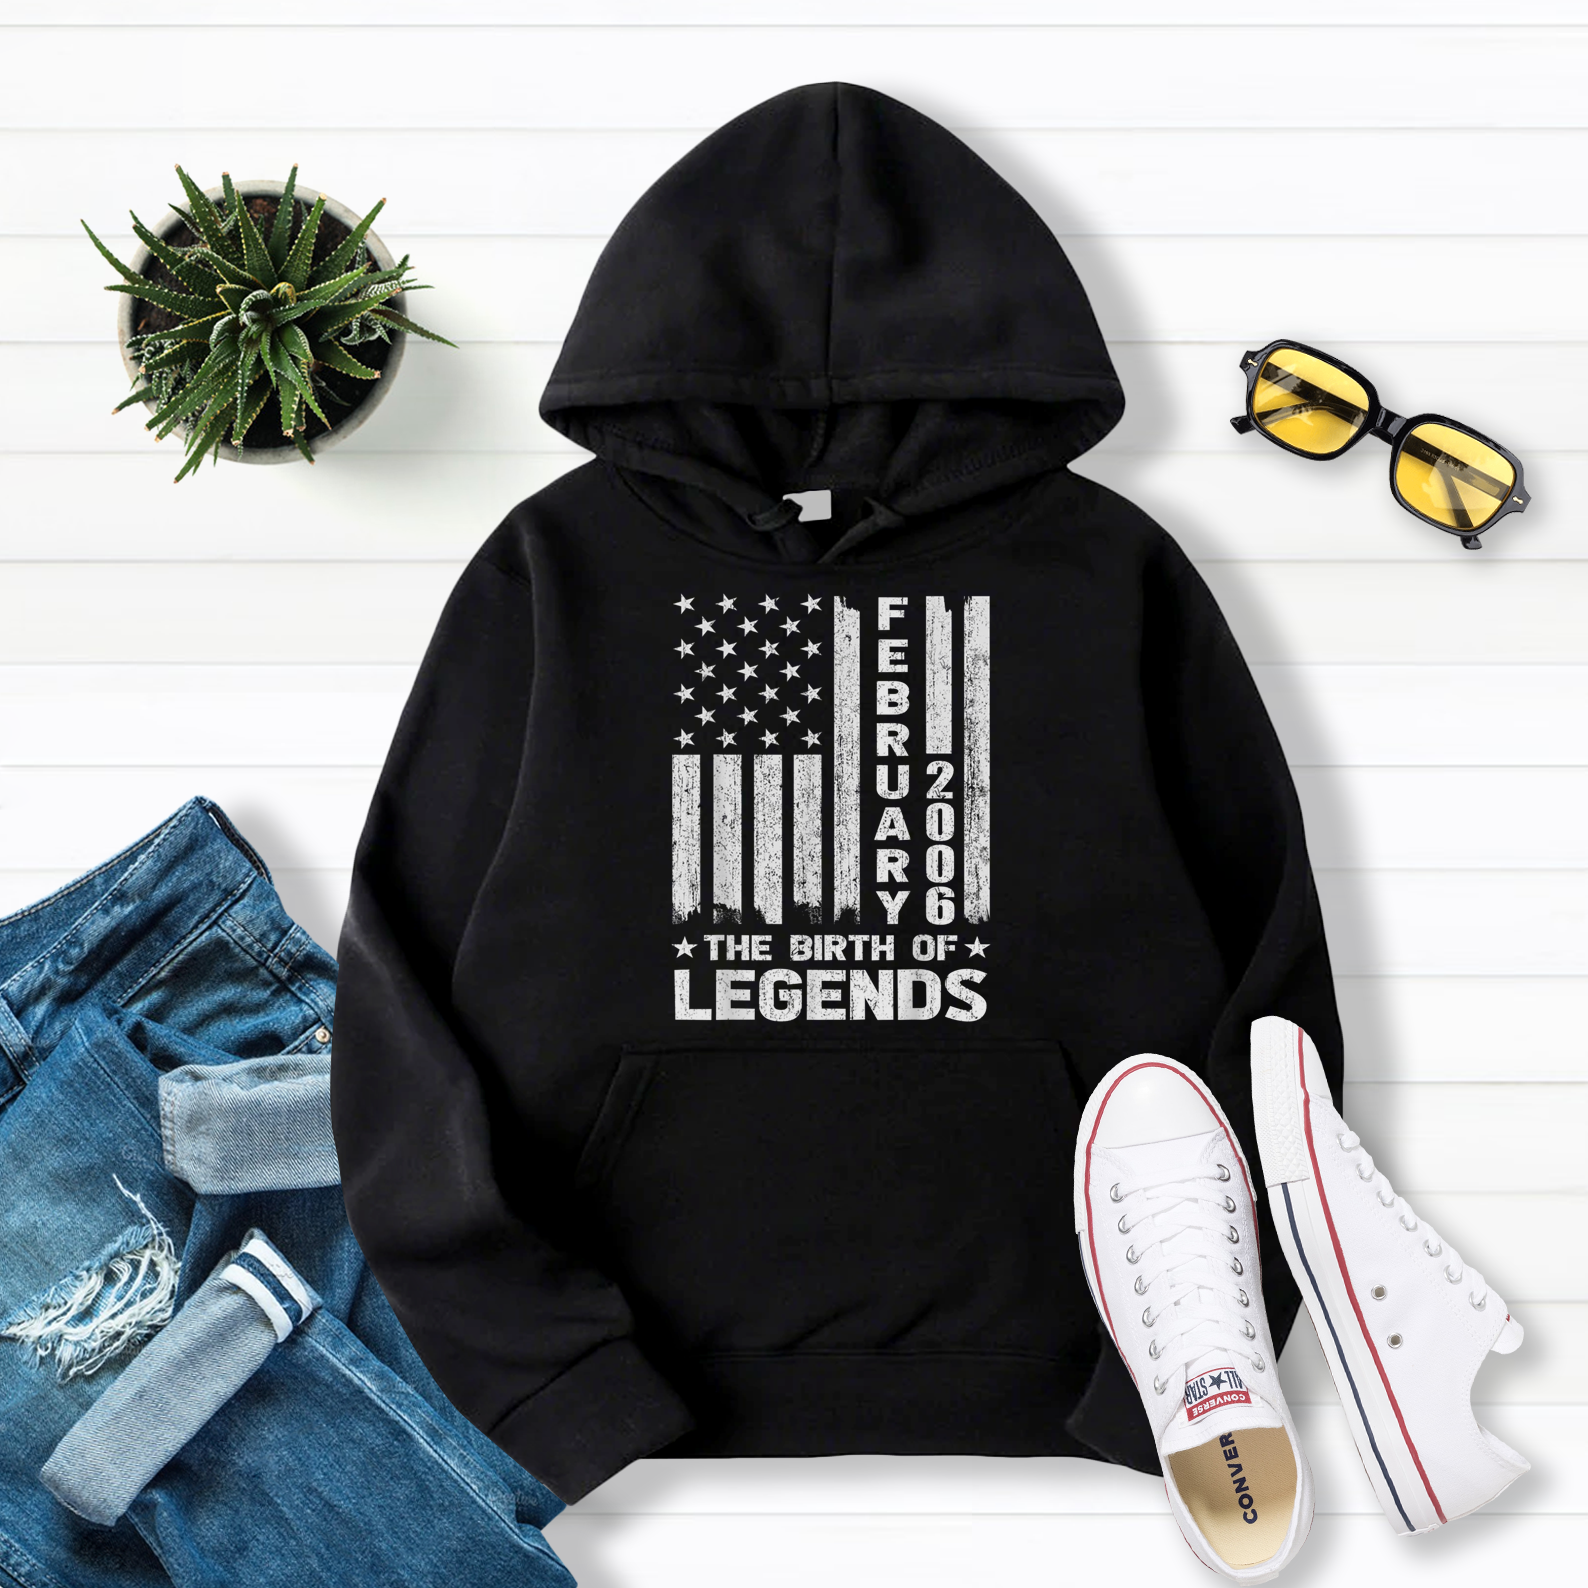 15Th Birthday Gift February 2006 The Birth Of Legends Pullover Hoodie Black S-5Xl